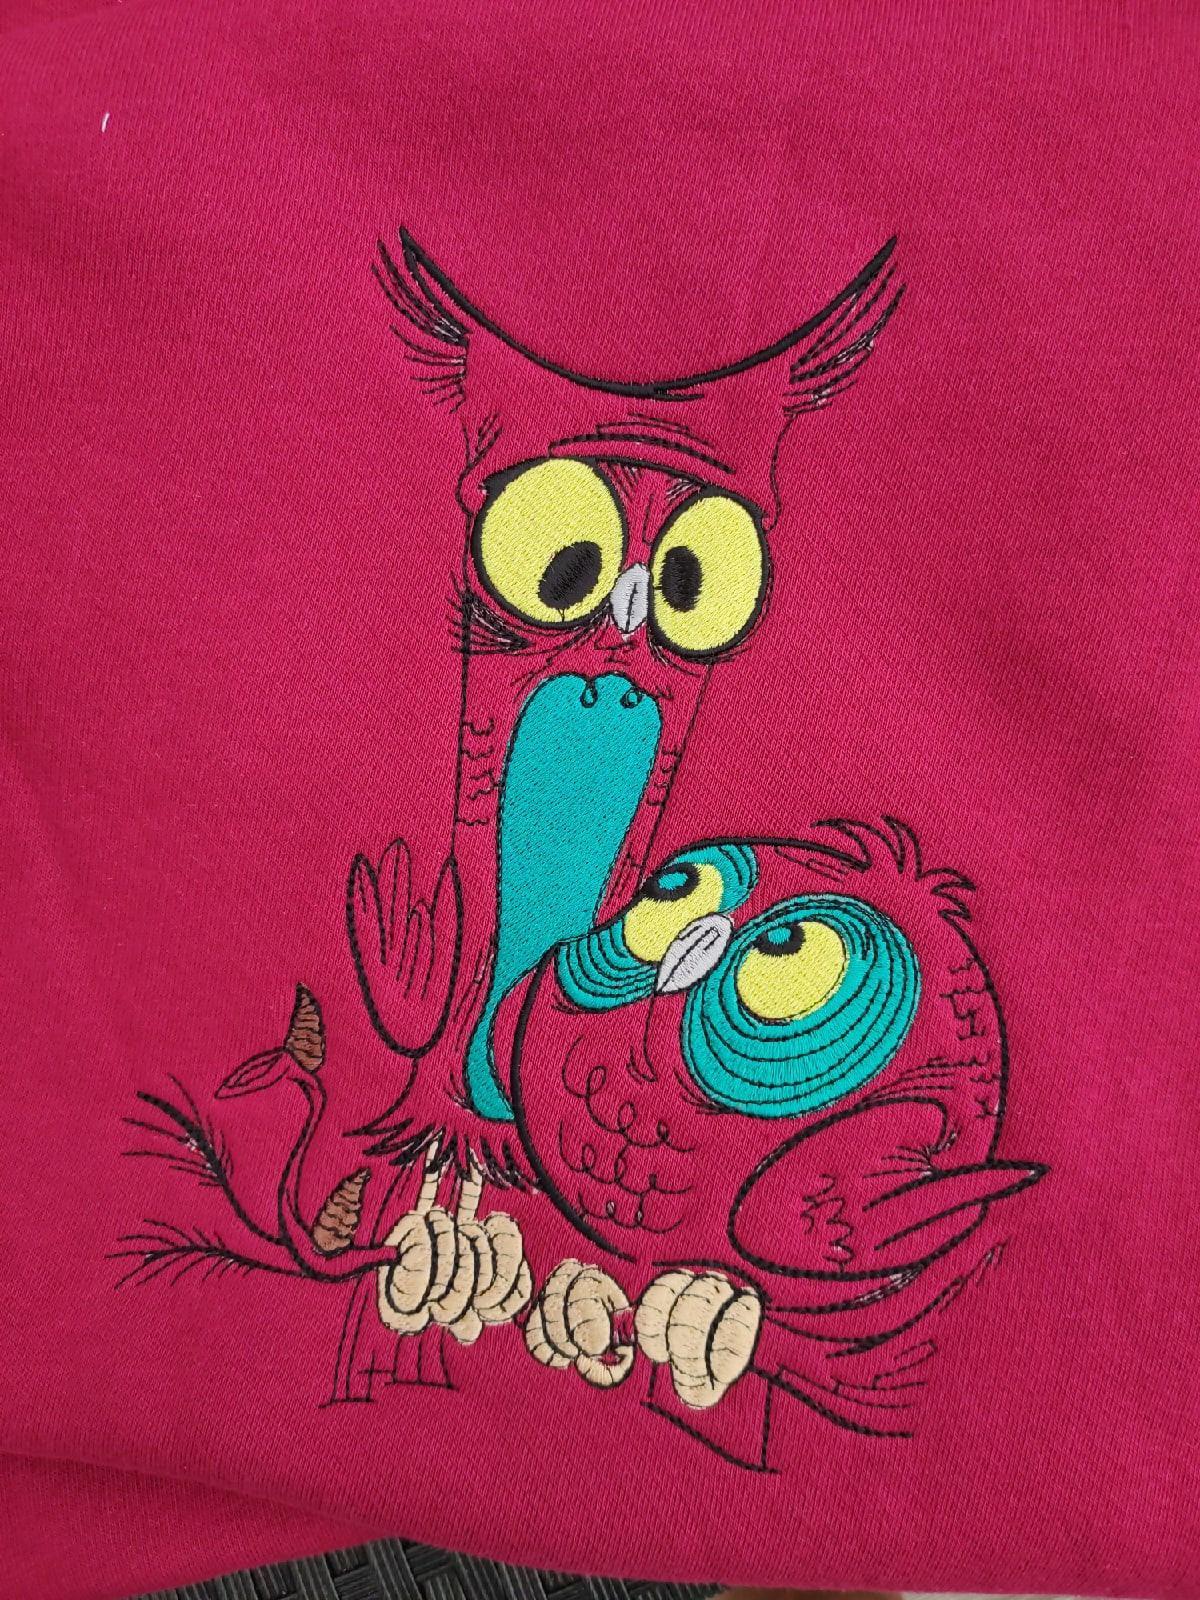 Two Owls Friends Embroidery Design: Symbol of Friendship and Wisdom